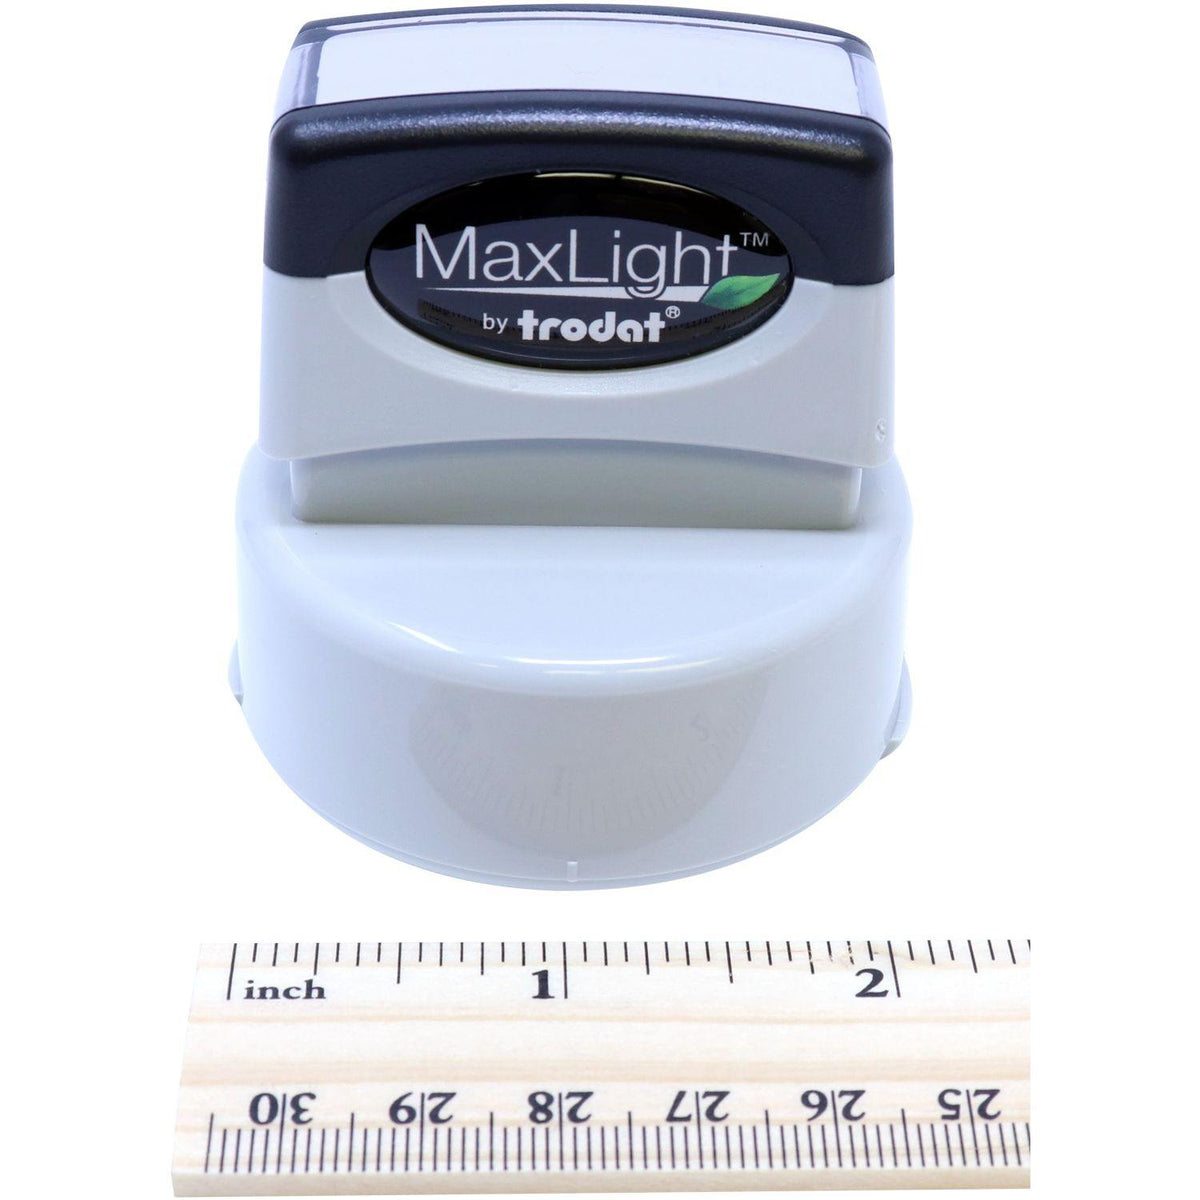 Real Estate Appraiser MaxLight Pre Inked Rubber Stamp of Seal - Engineer Seal Stamps - Stamp Type_Pre-Inked, Type of Use_Professional